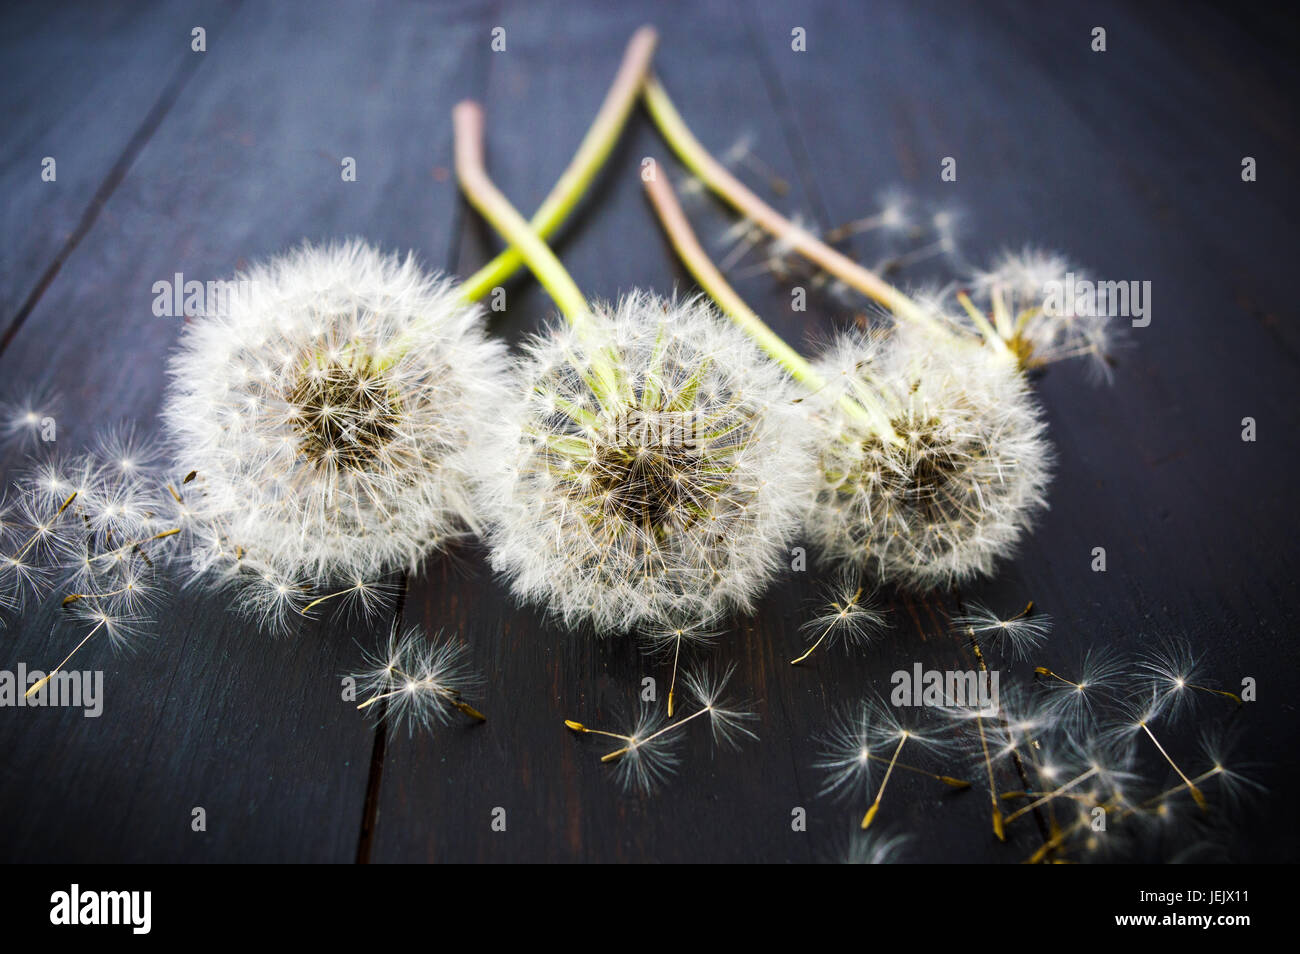 Three dried white dandelions on the wooden table Stock Photo